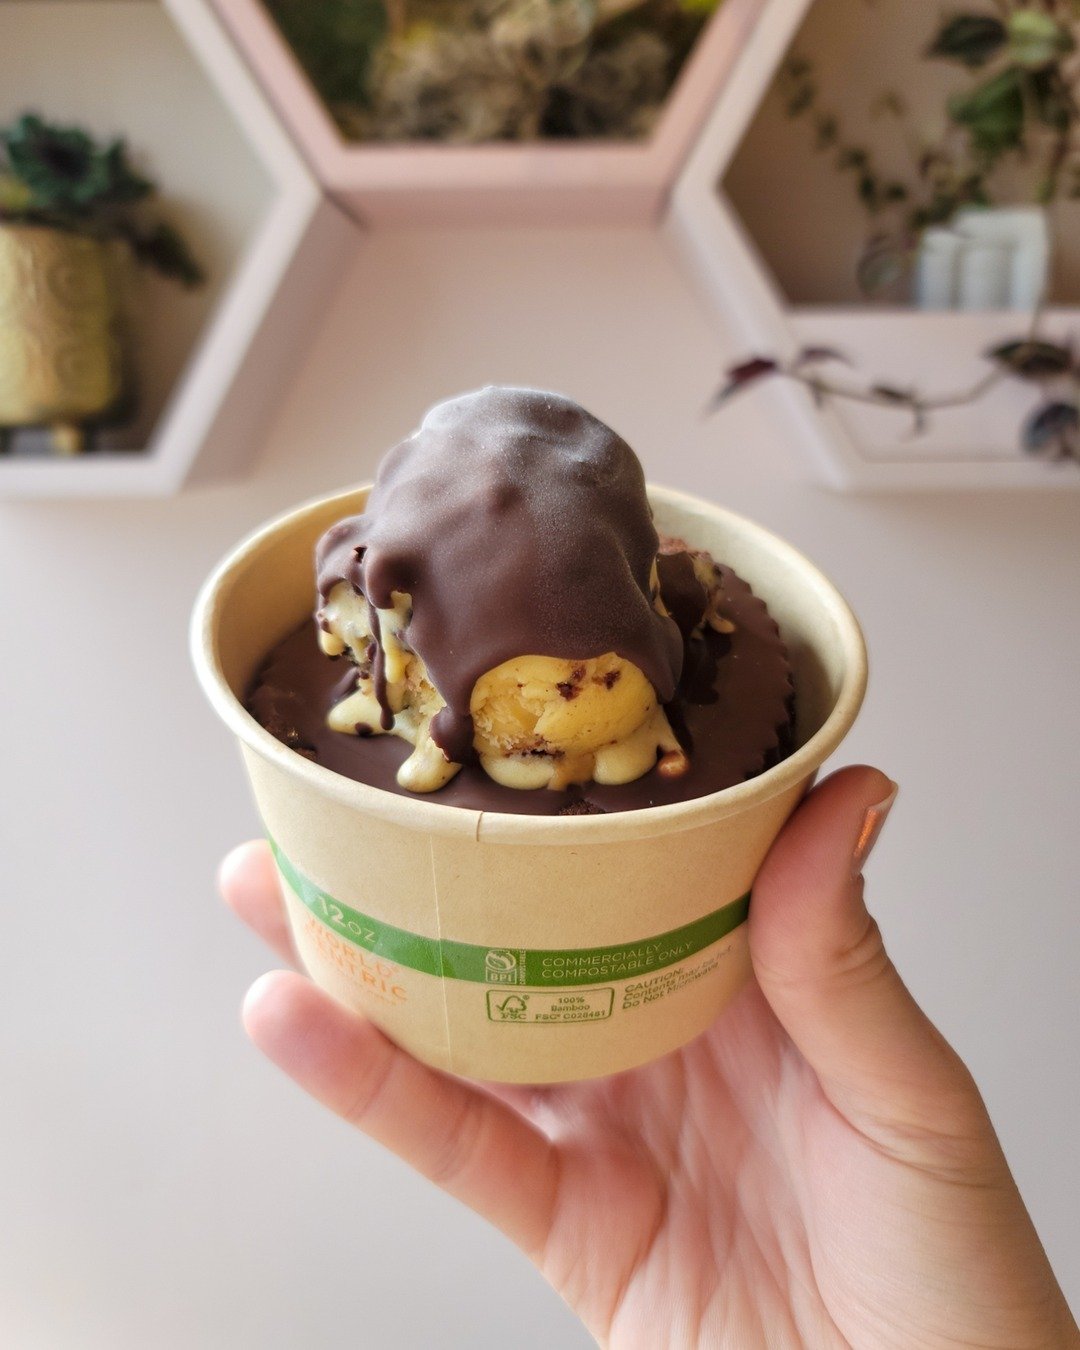 If you're looking for a particularly indulgent treat this weekend, Amanda's April Sundae has been a really popular one these past couple weeks! With layers of fudgy brownie rounds, Peanut Butter Fudge Crunch ice cream, and peanut butter and chocolate